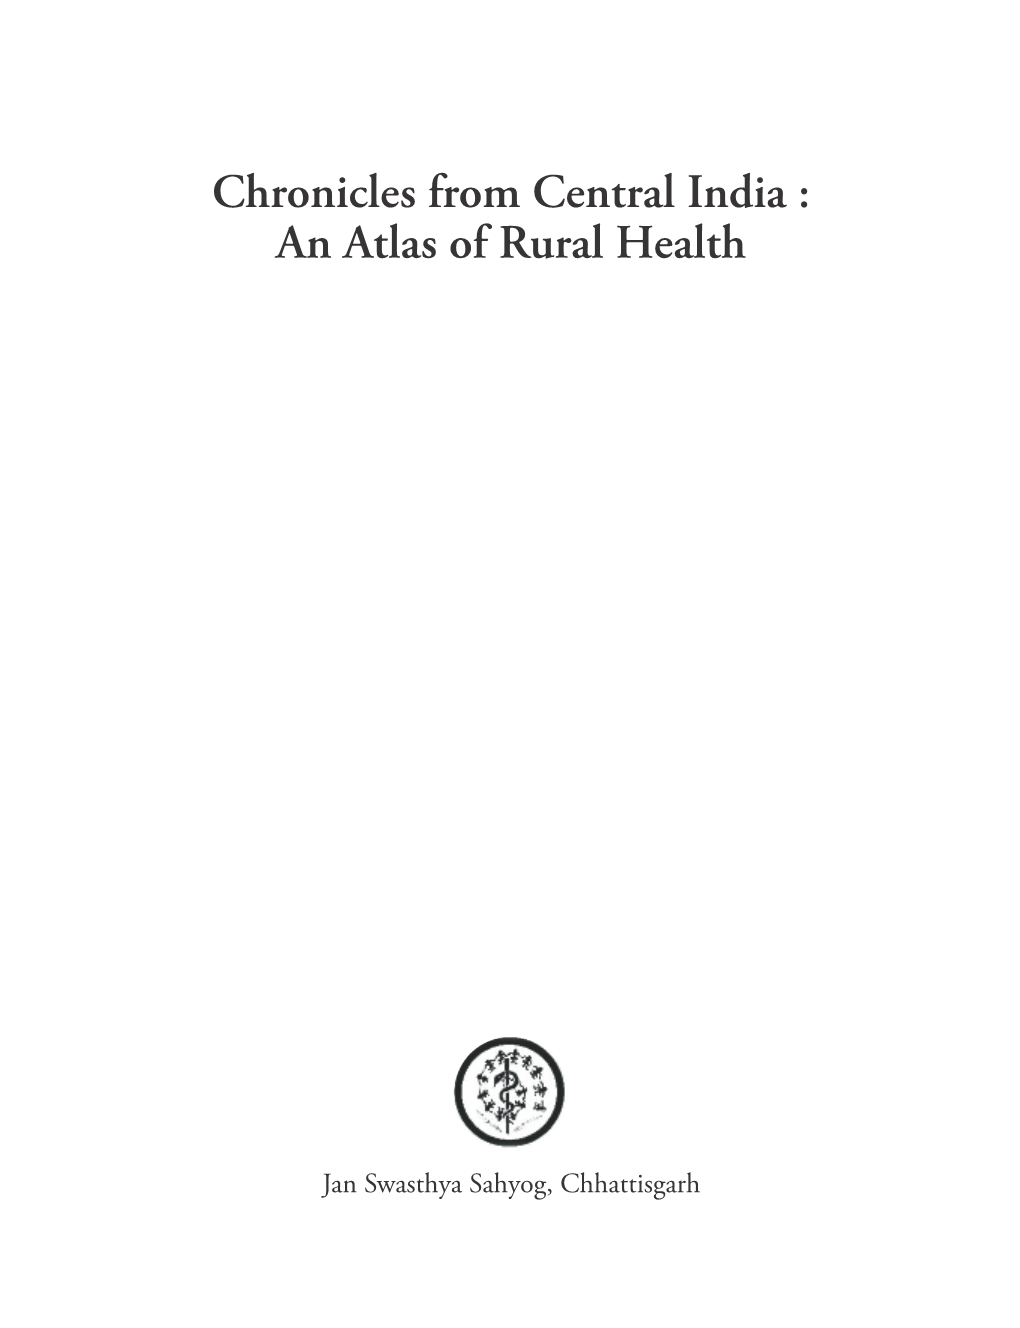 Chronicles from Central India: Atlas of Rural Health